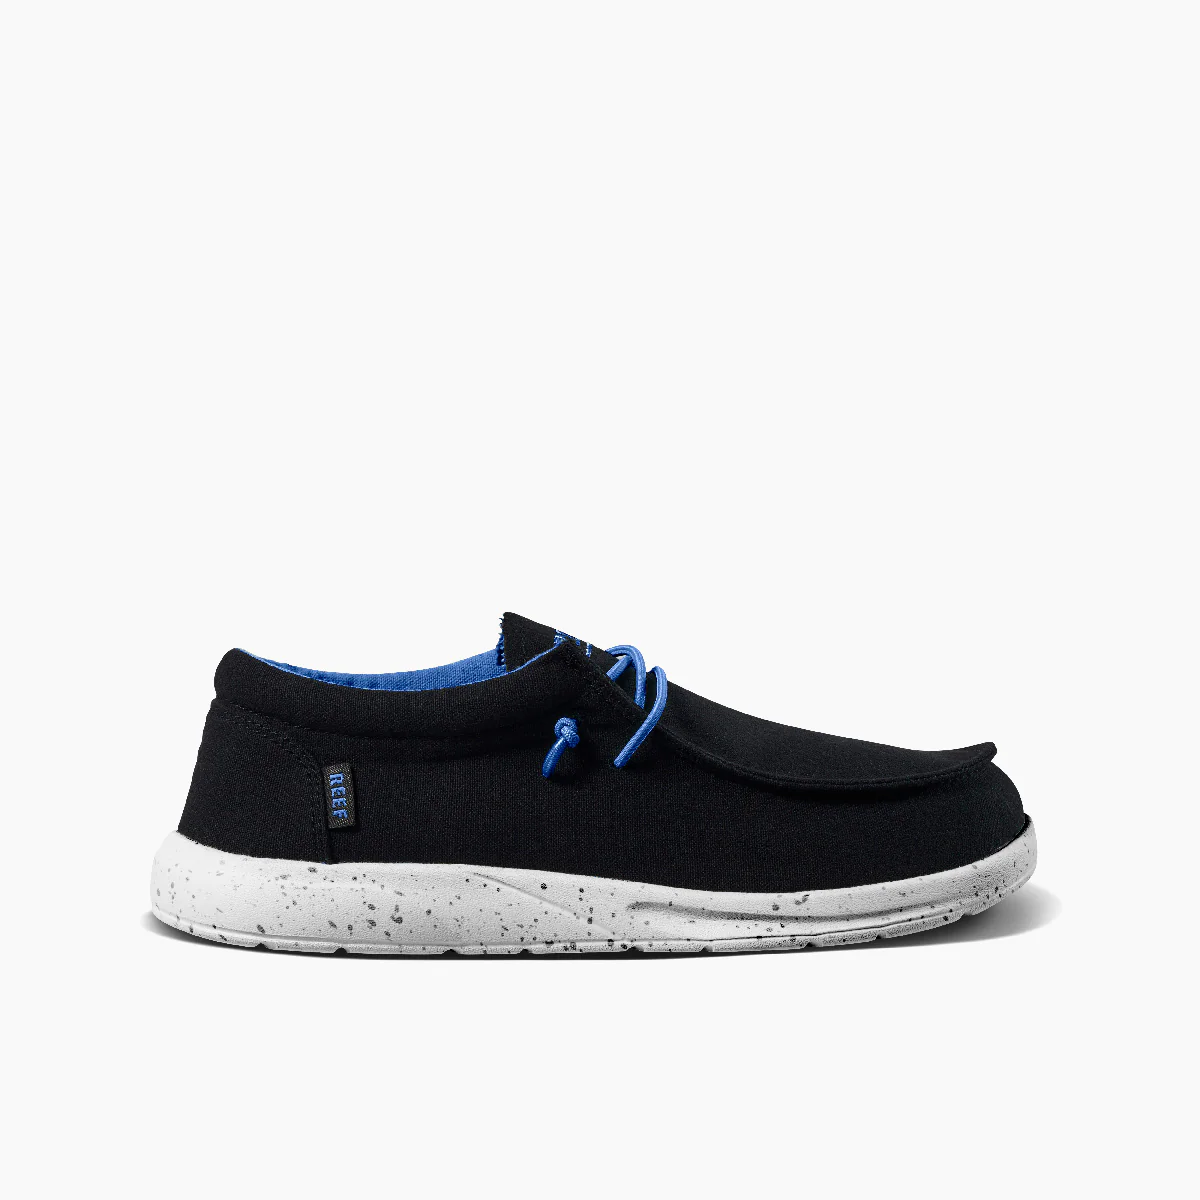 REEF comfortable boat shoes in black, white and blue side view